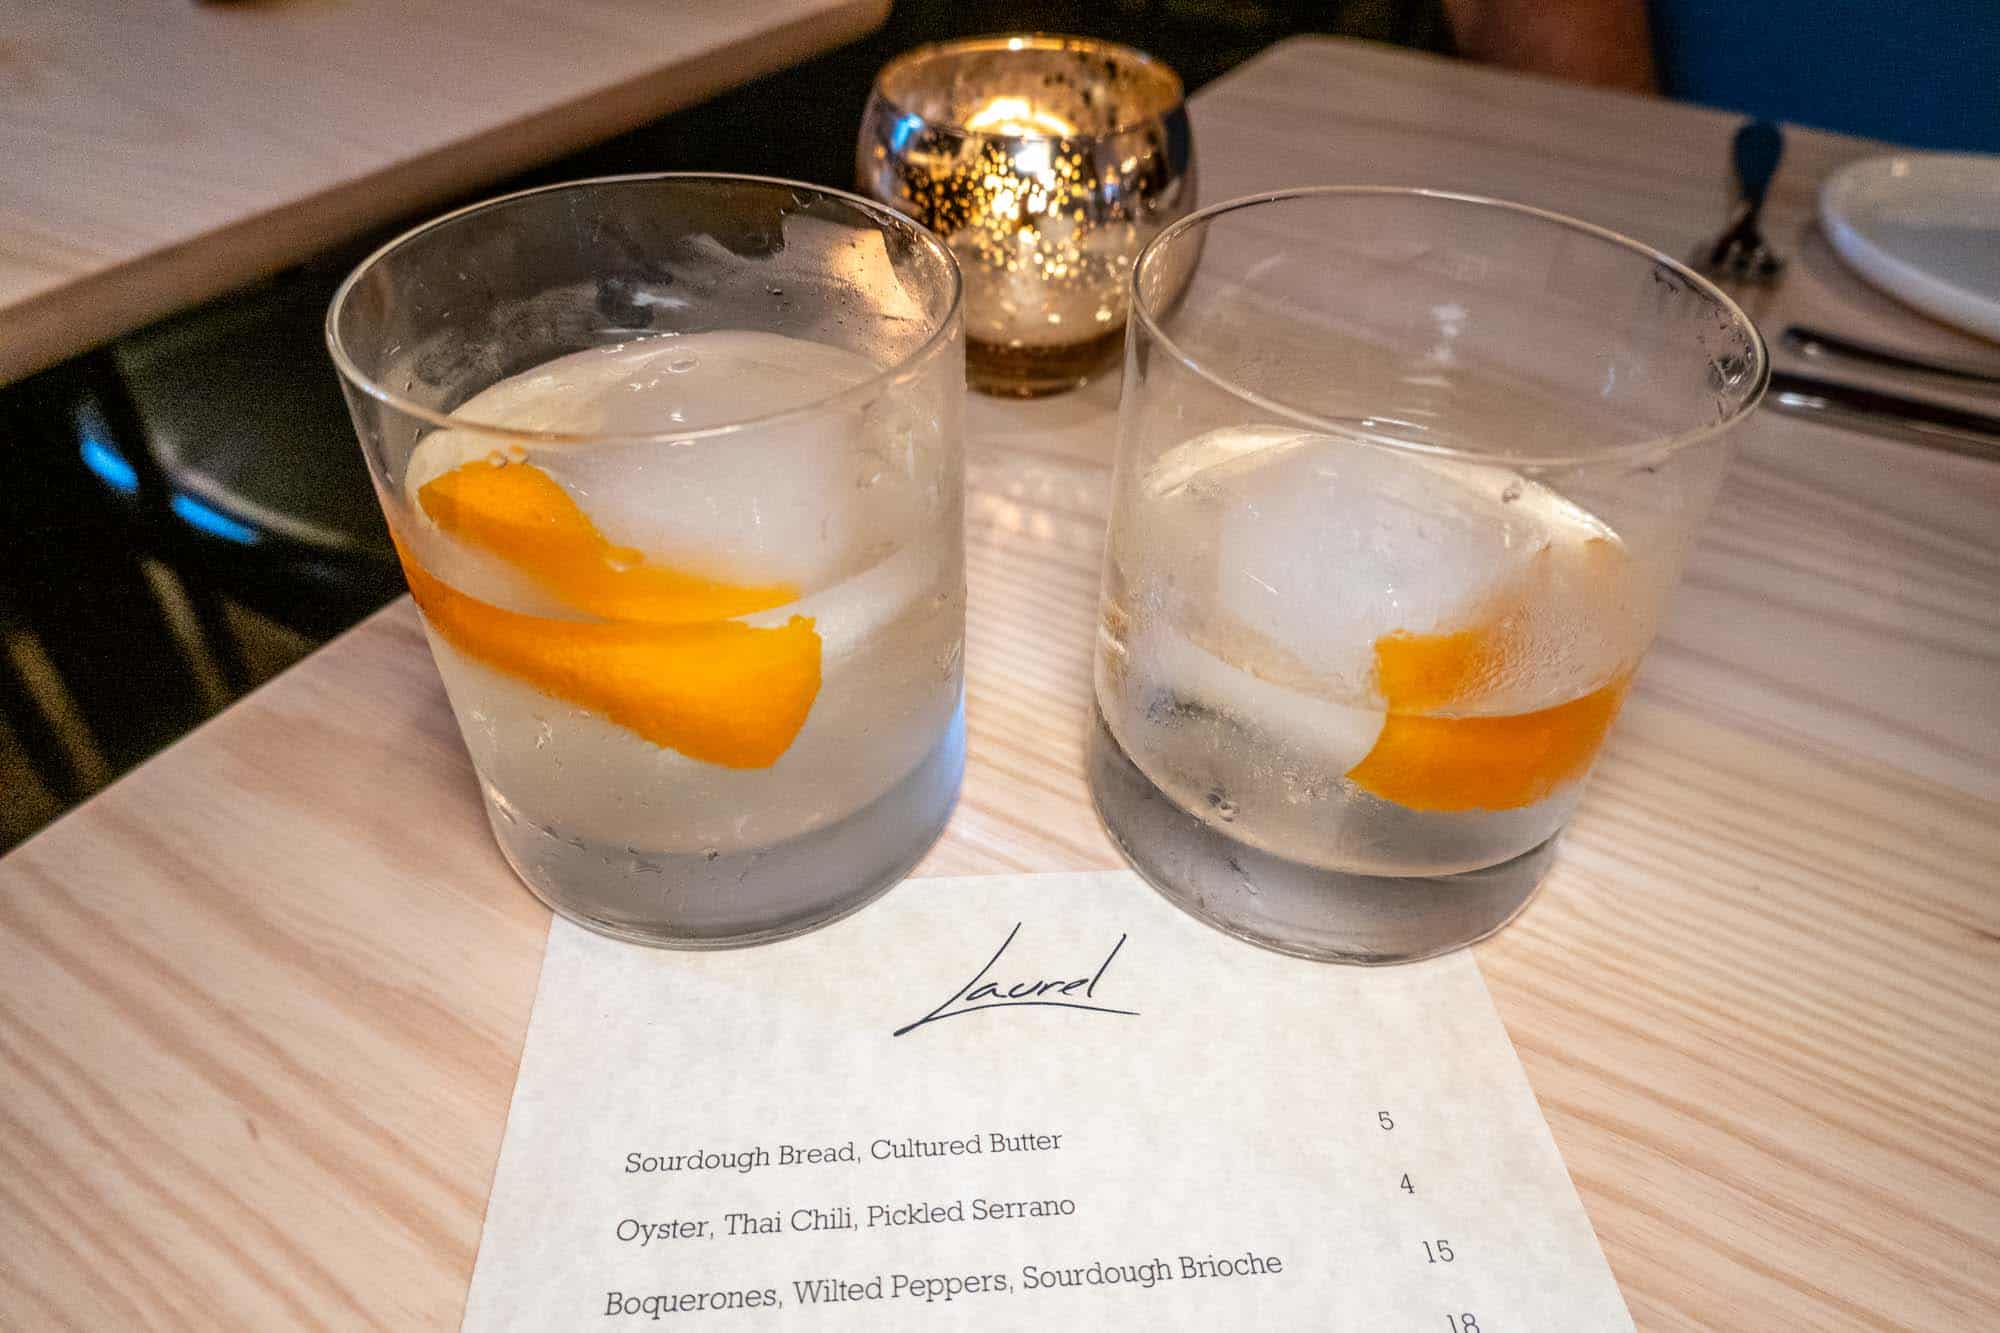 Cocktails with orange peel on table with menu that says "Laurel"